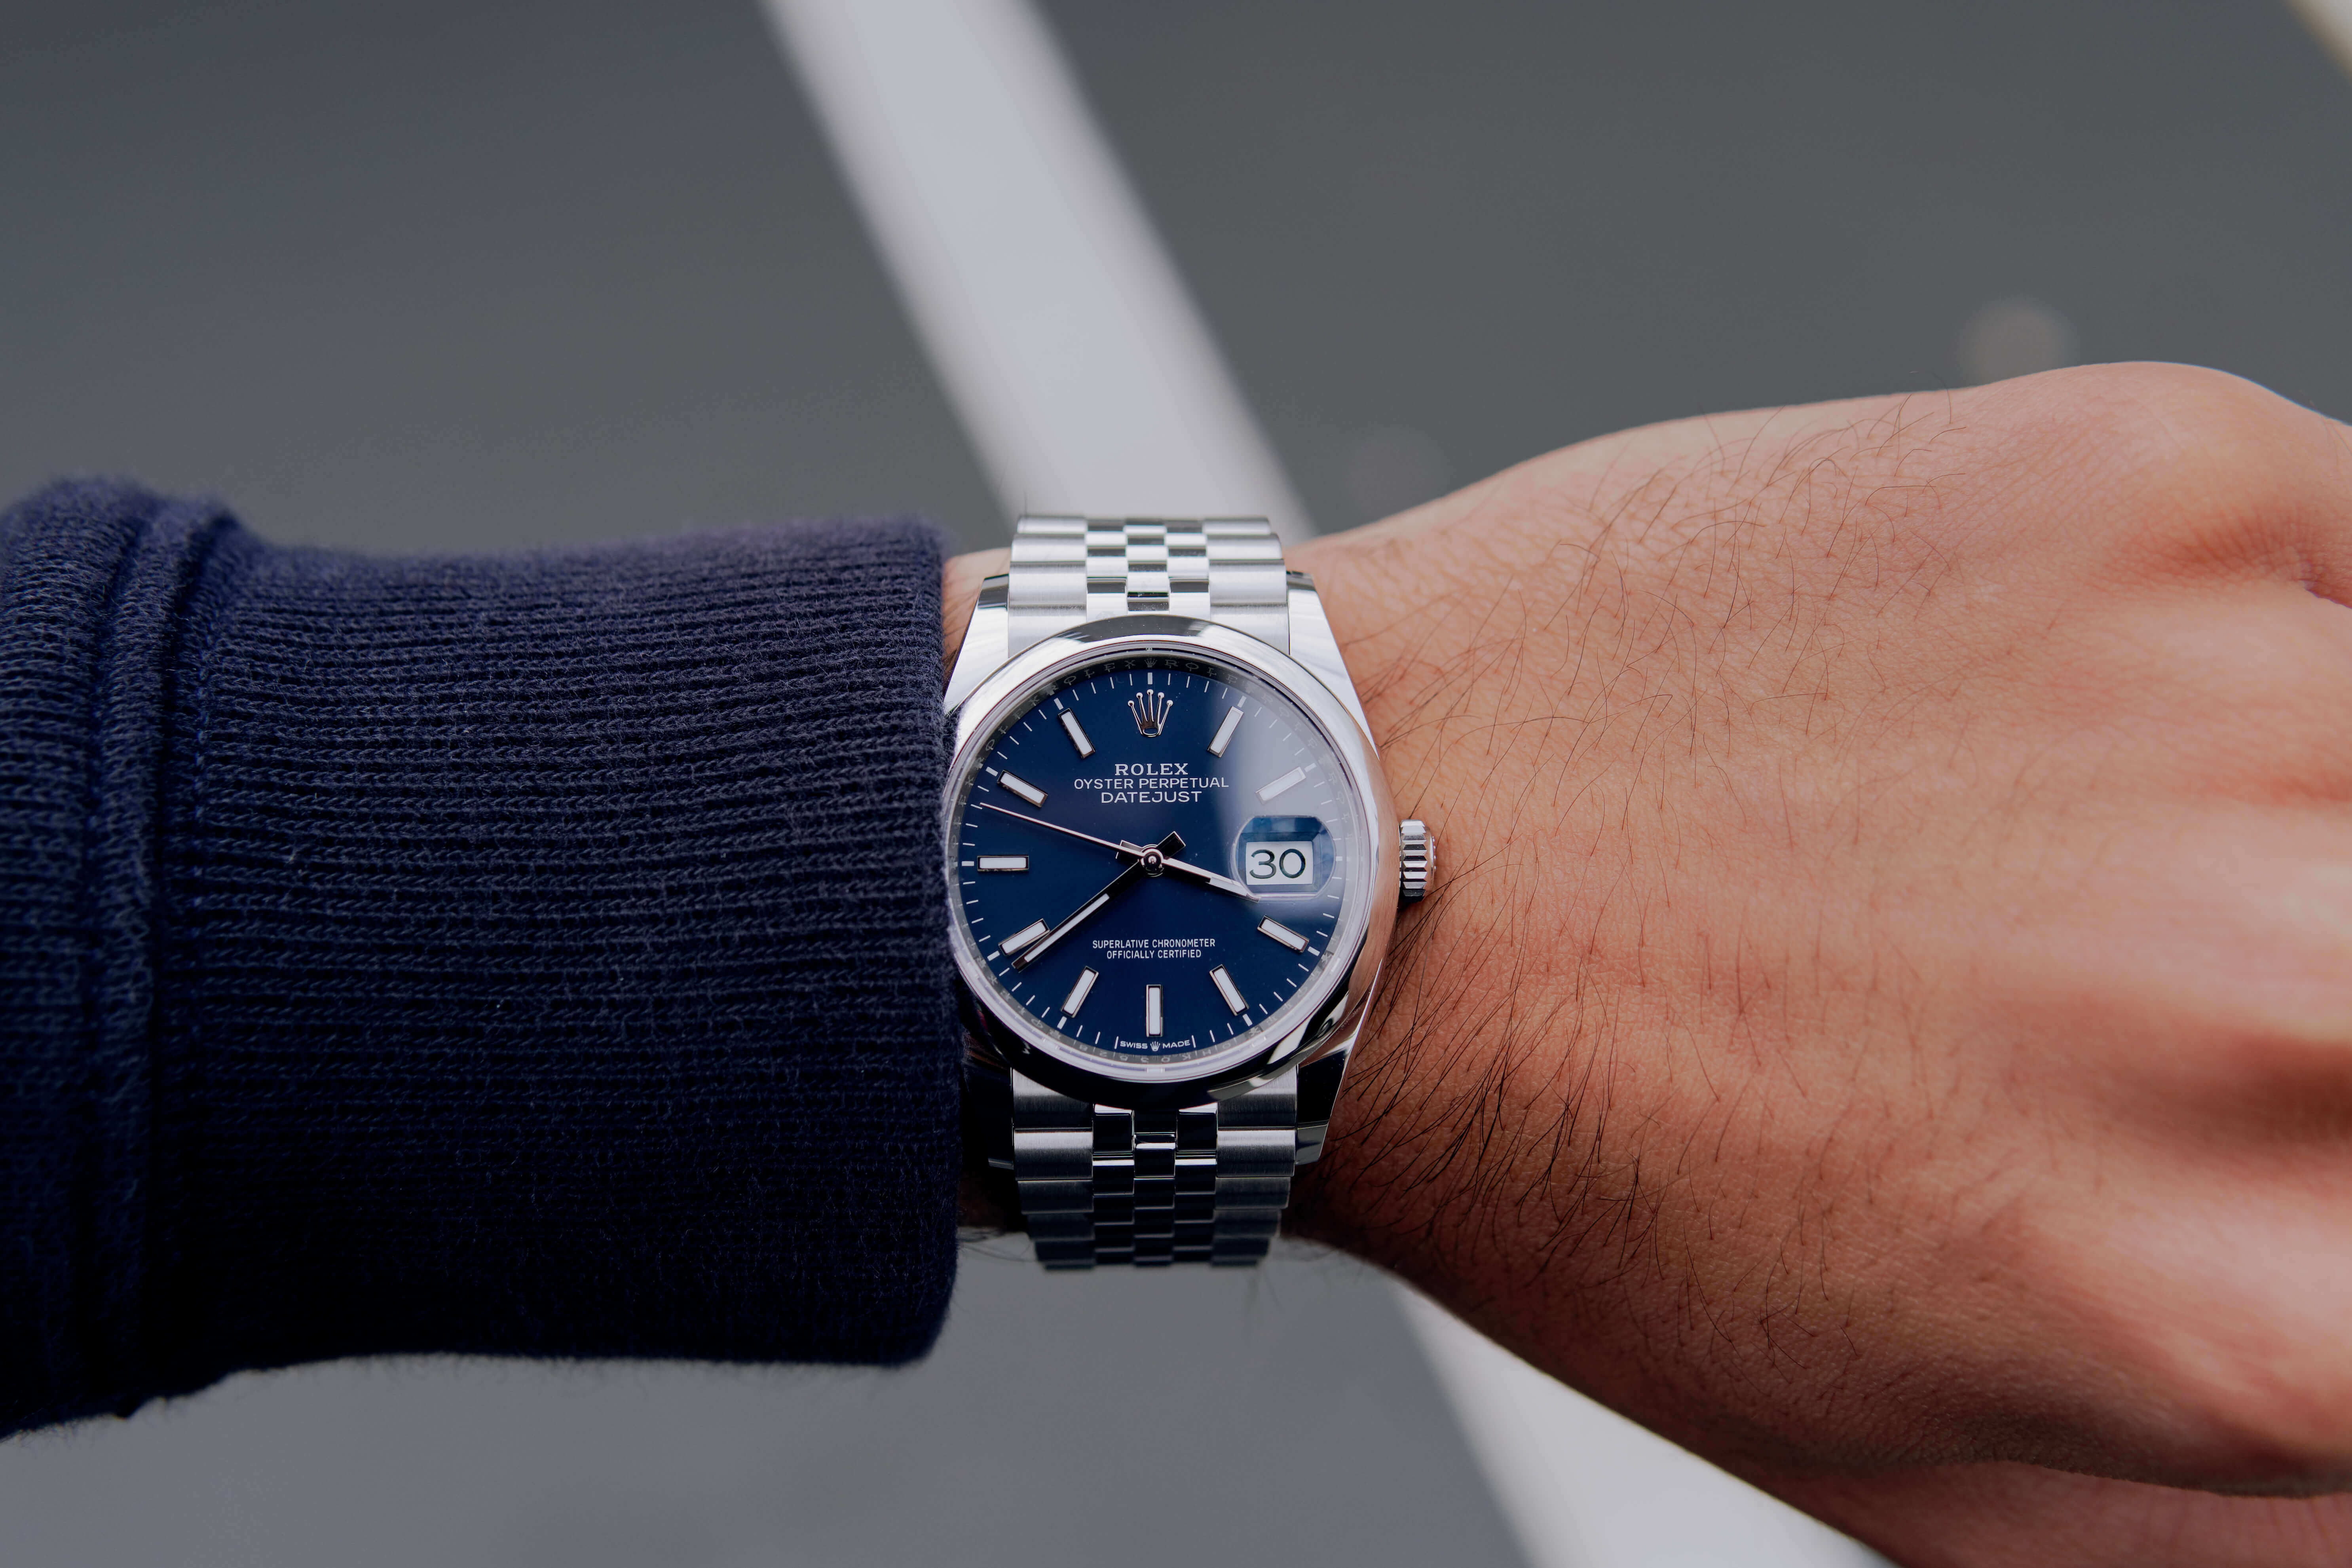 Rolex Datejust 126200 Blue dial on the wrist